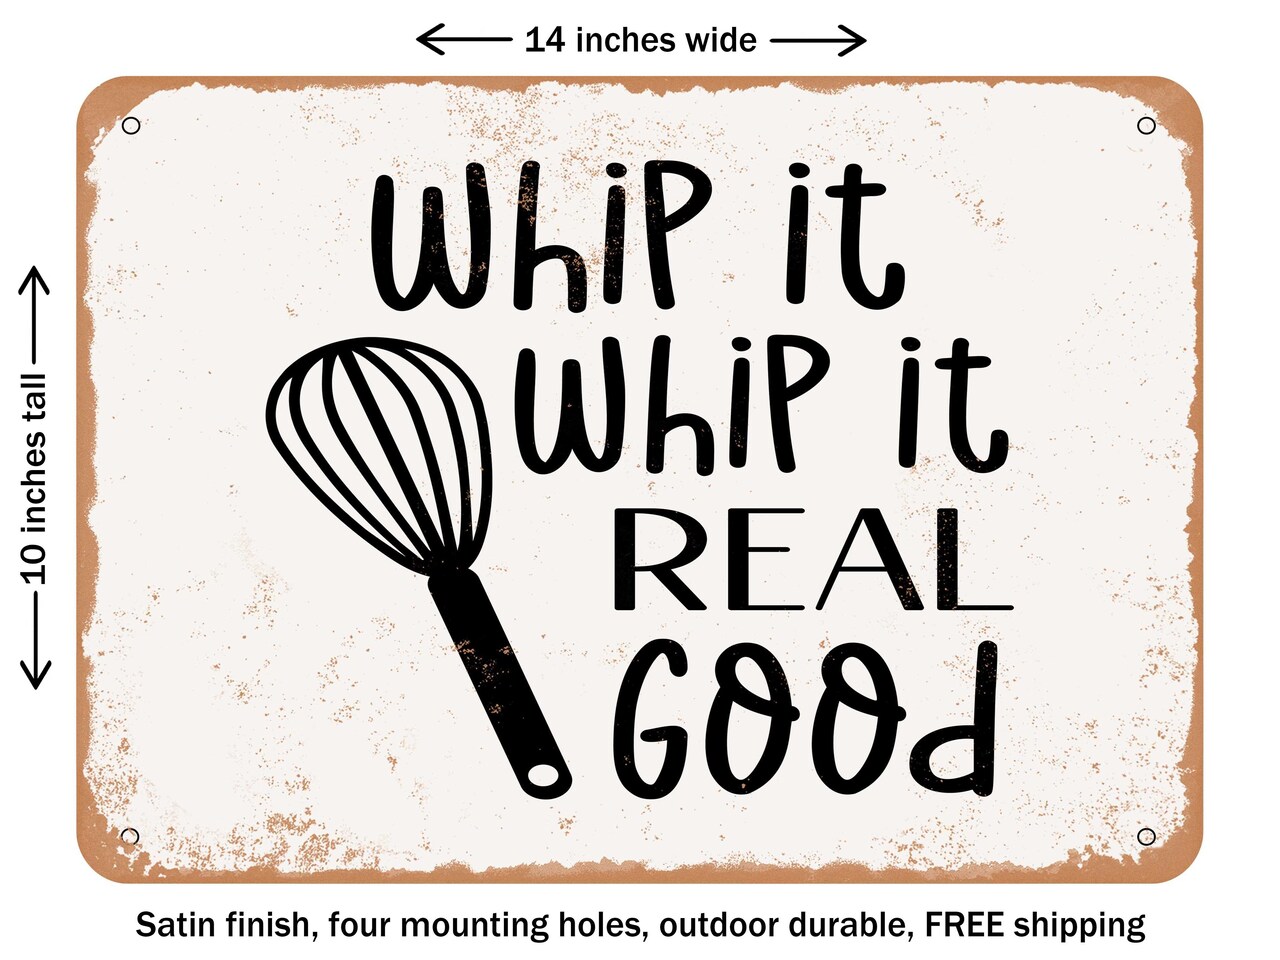 DECORATIVE METAL SIGN - Whip It Whip It Real Good - Vintage Rusty Look